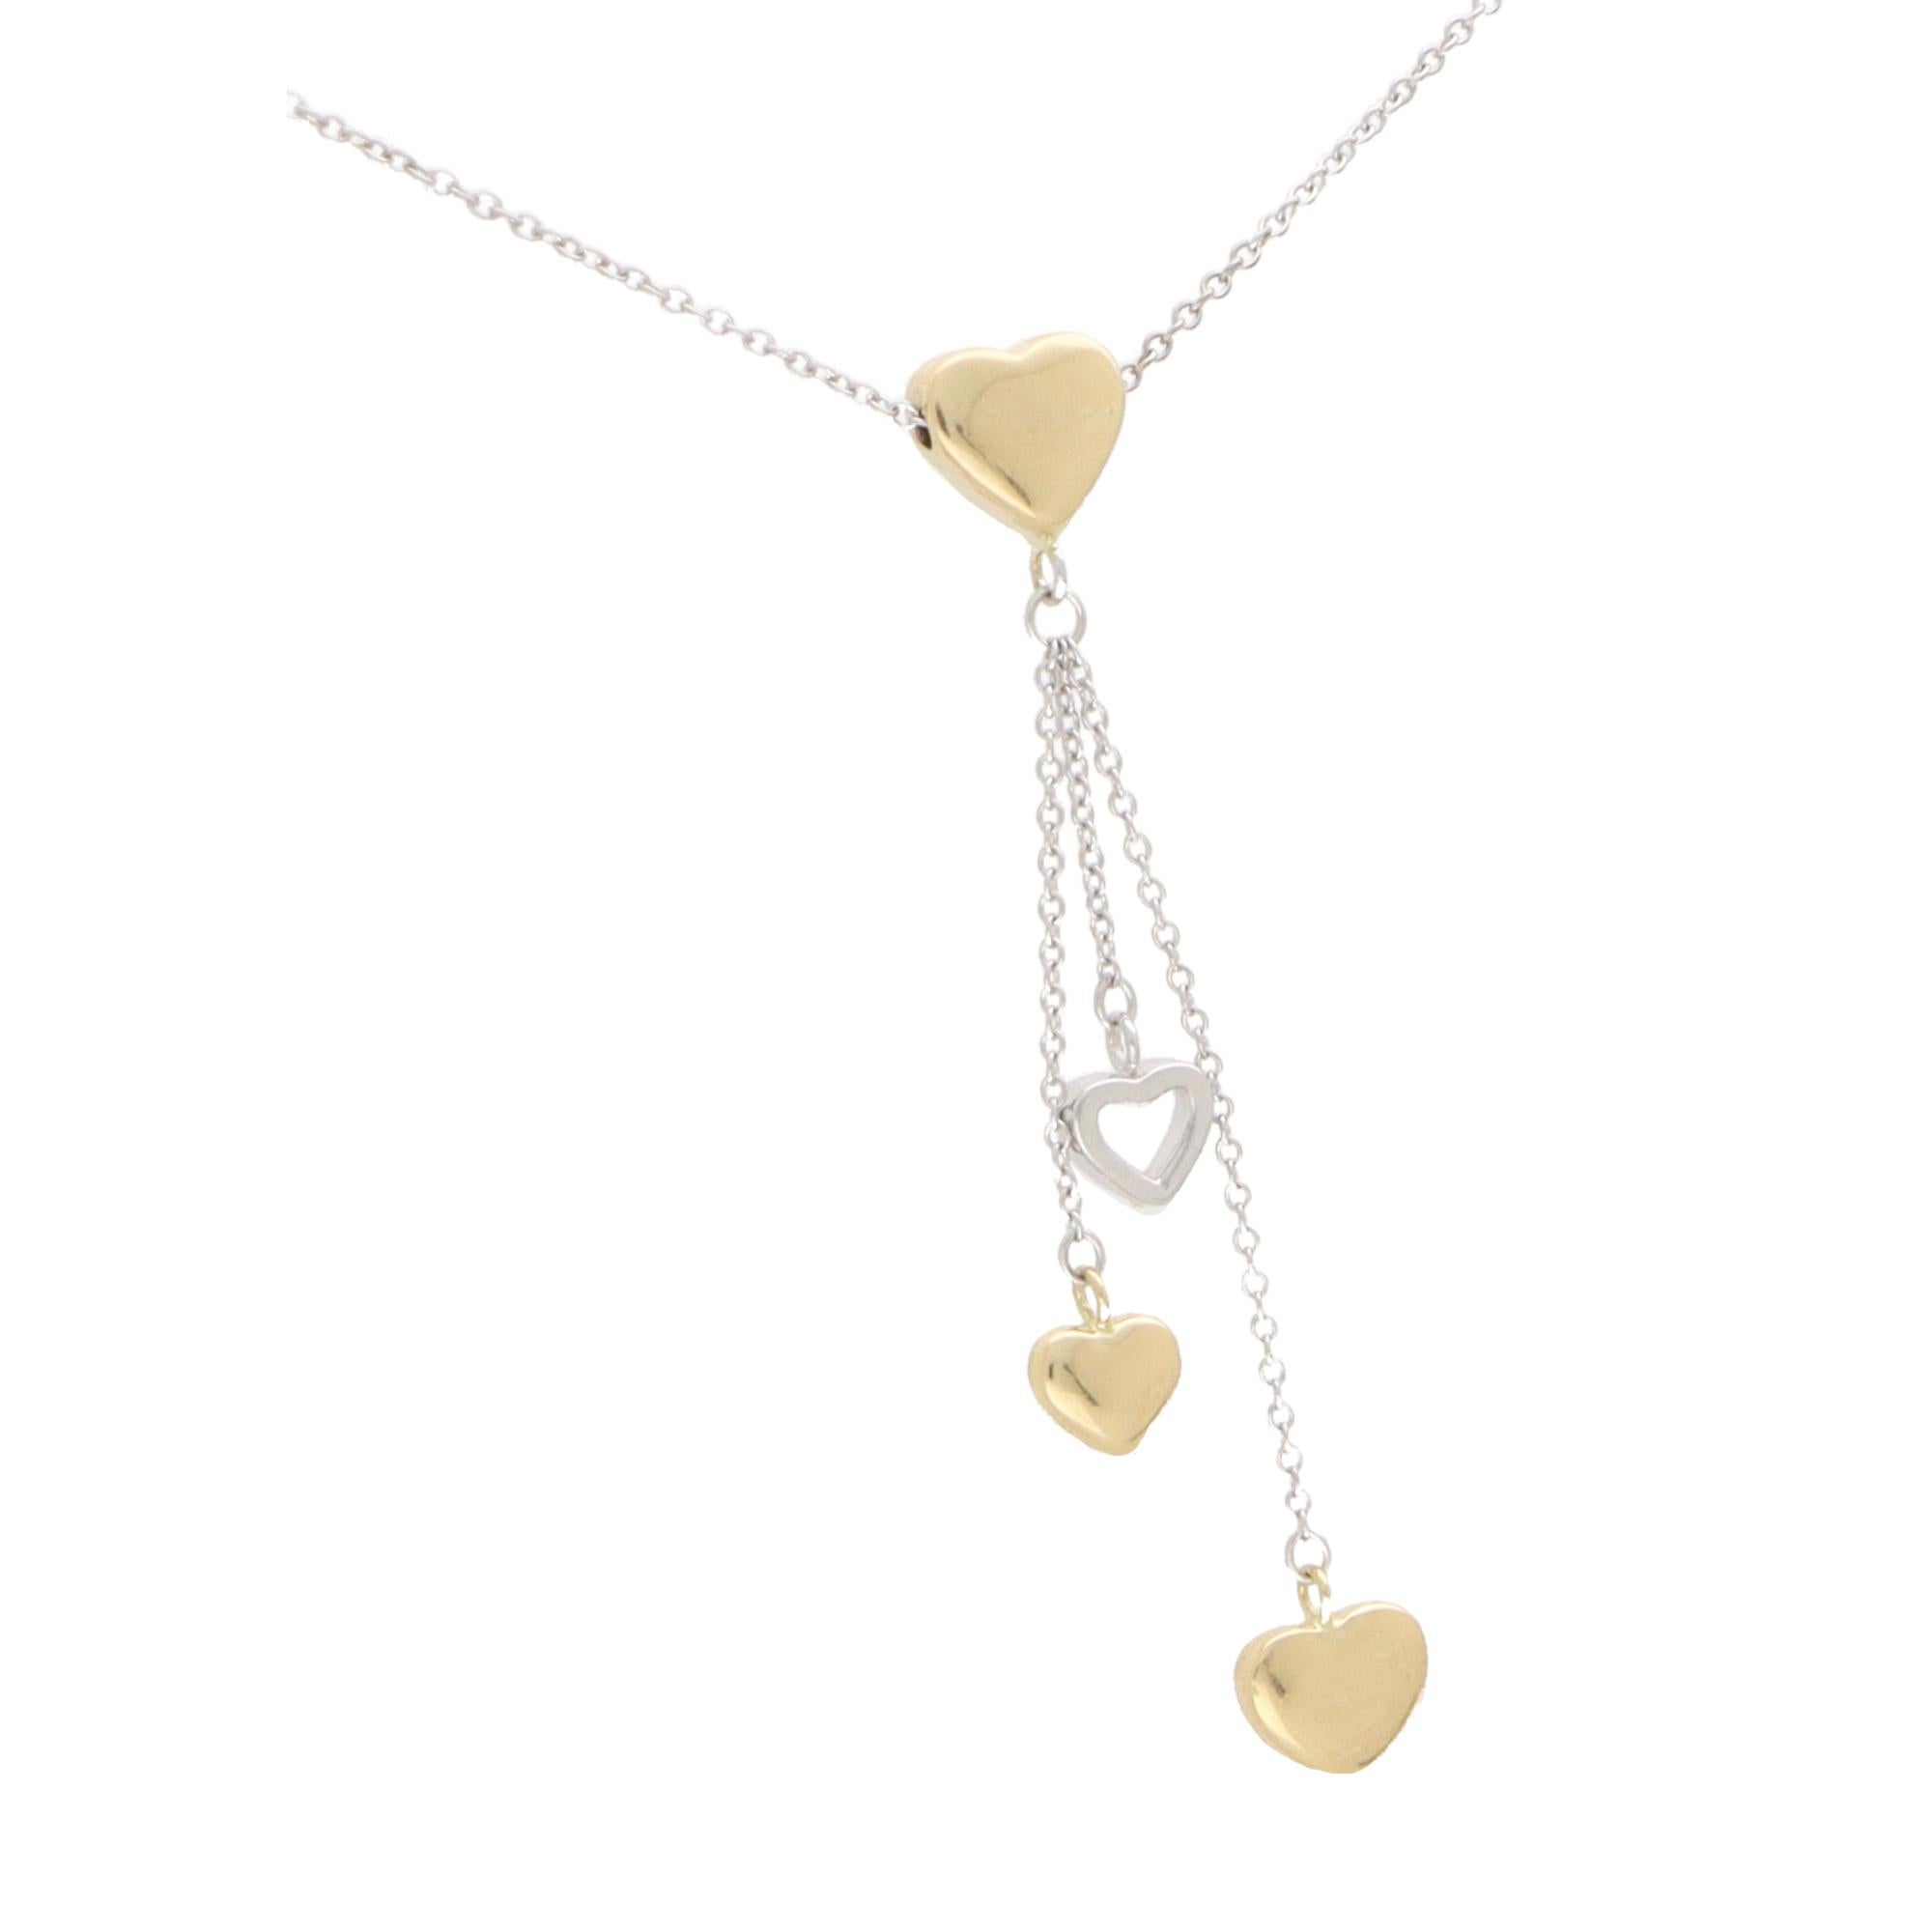 Retro Vintage Tiffany & Co. Heart Drop Necklace Set in 18k Yellow and White Gold